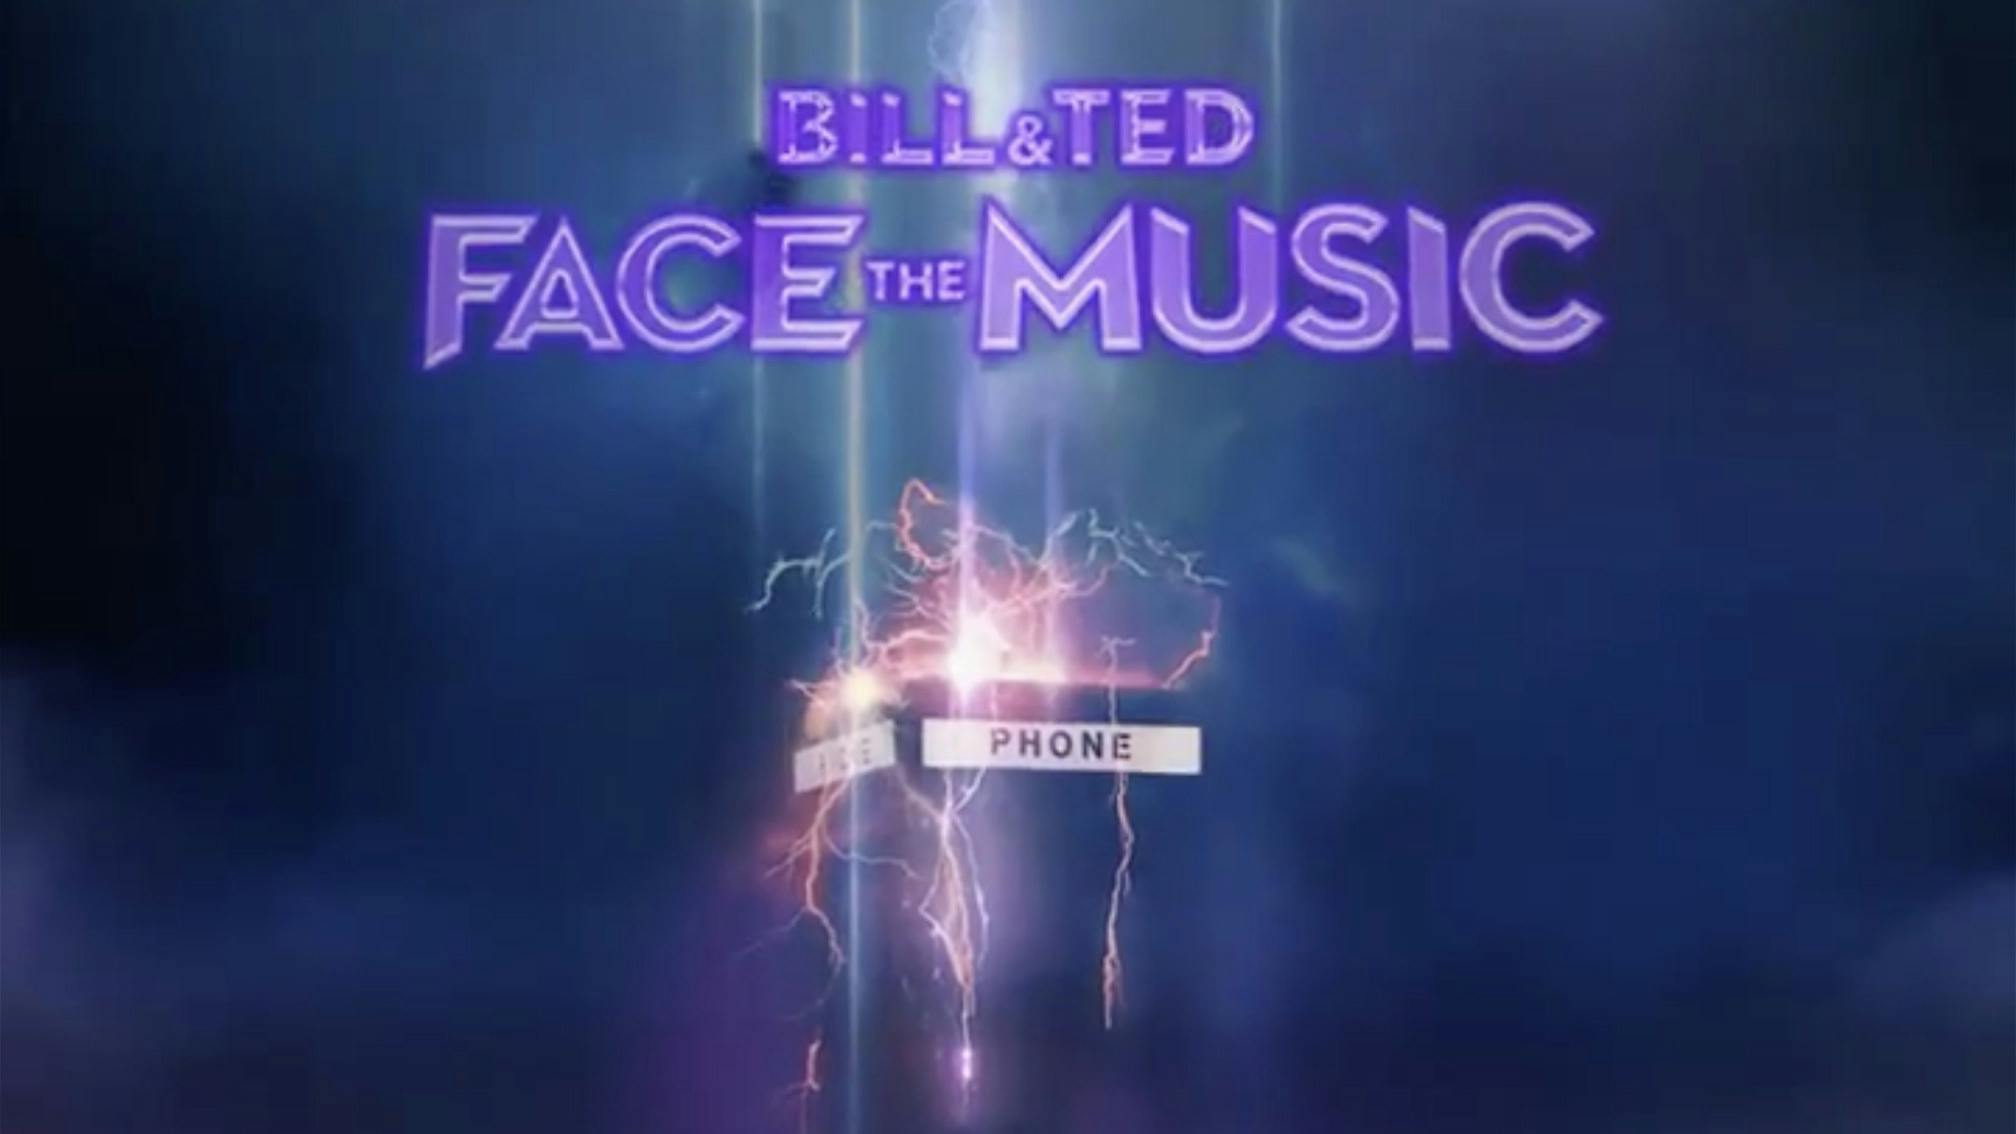 Weezer Have Released A Song For The Bill & Ted Face The Music Soundtrack